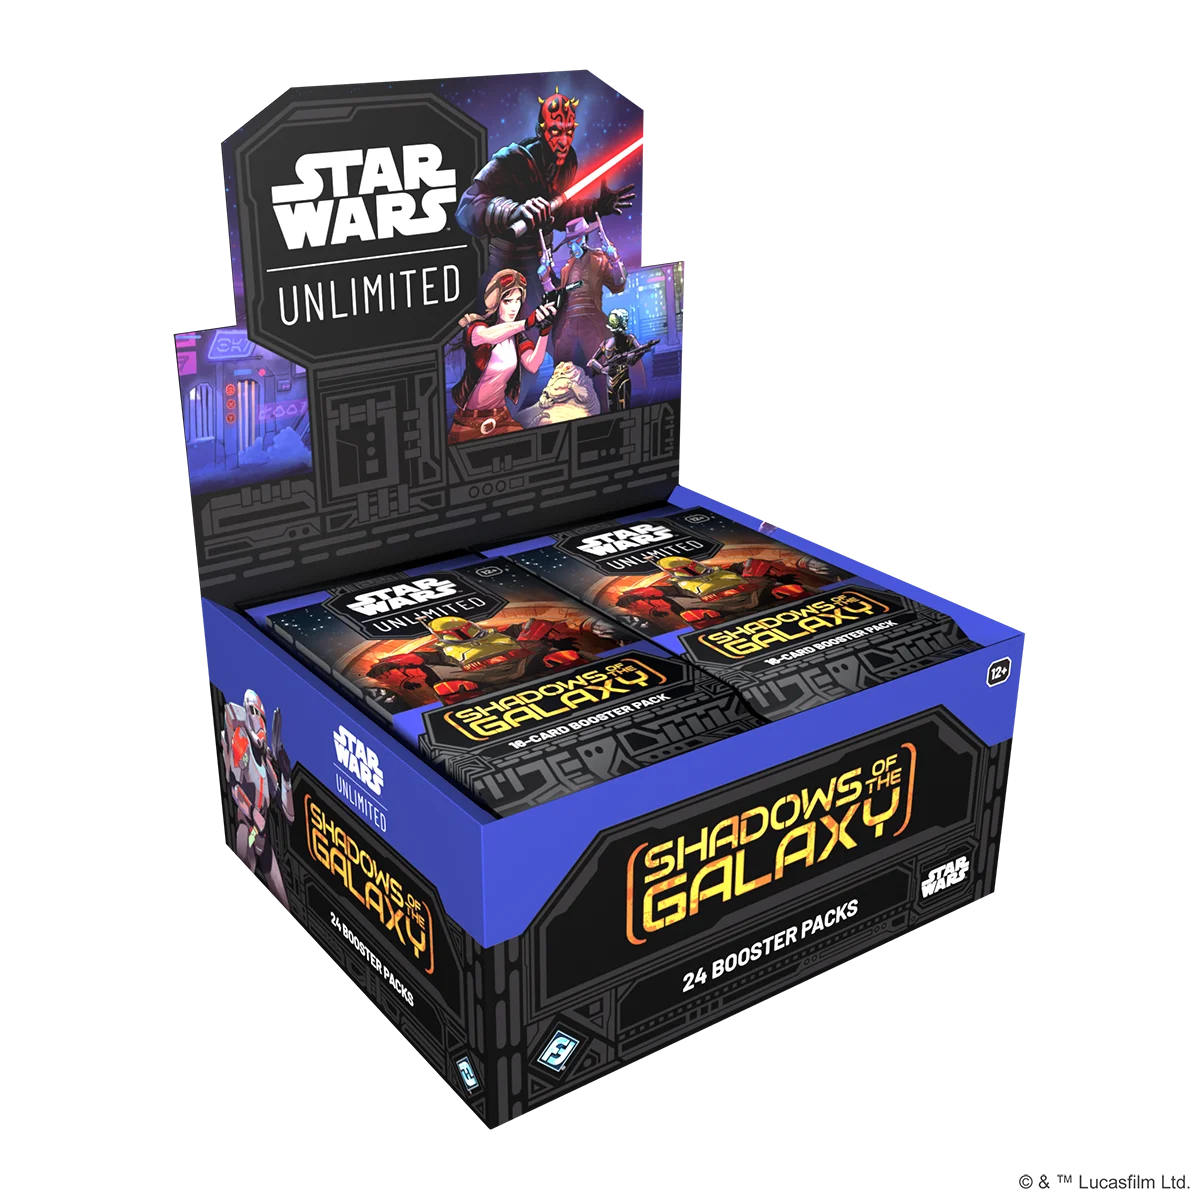 Star Wars: Unlimited – Shadows of the Galaxy (Booster-Display)